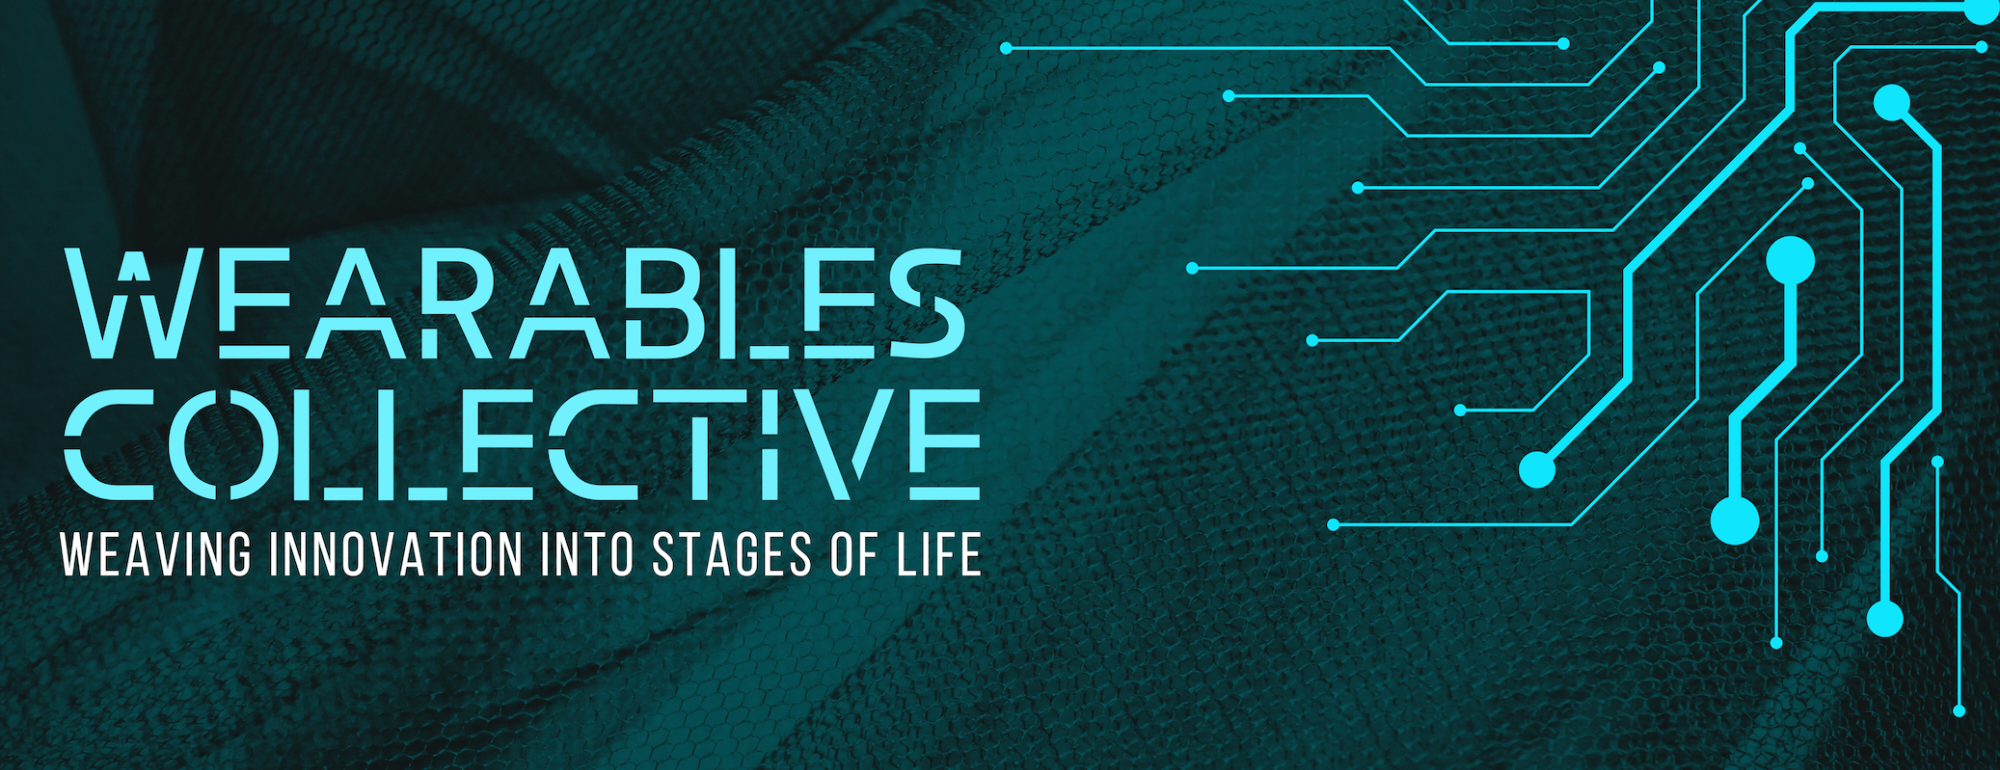 Wearables Collective, Weaving Innovation into Stages of Life